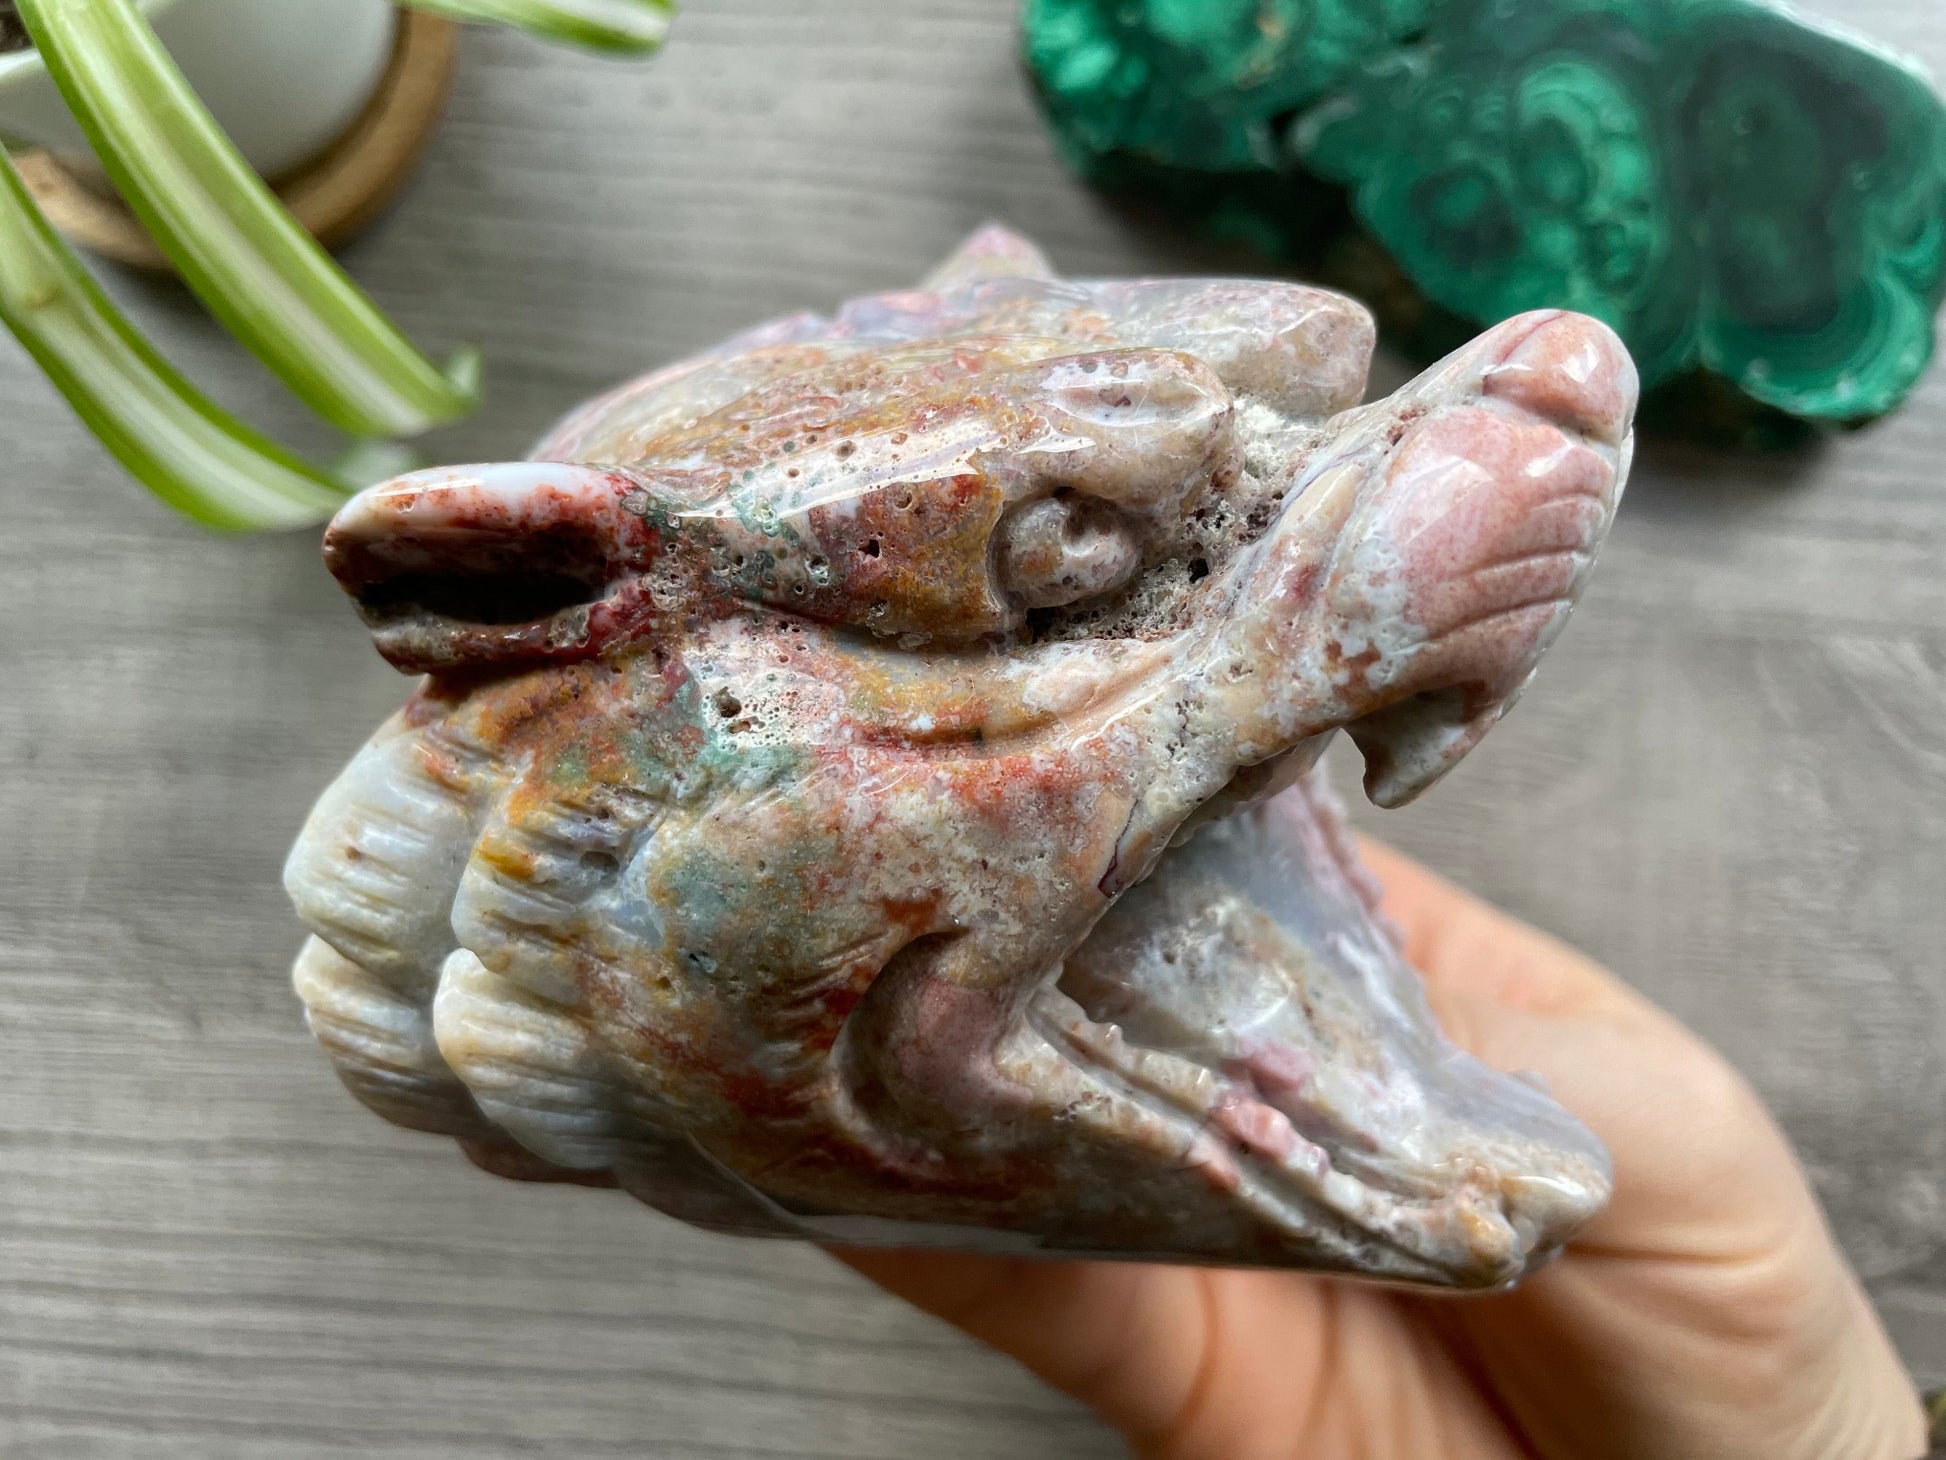 Pictured is a roaring tiger's head carved out of Indian agate.